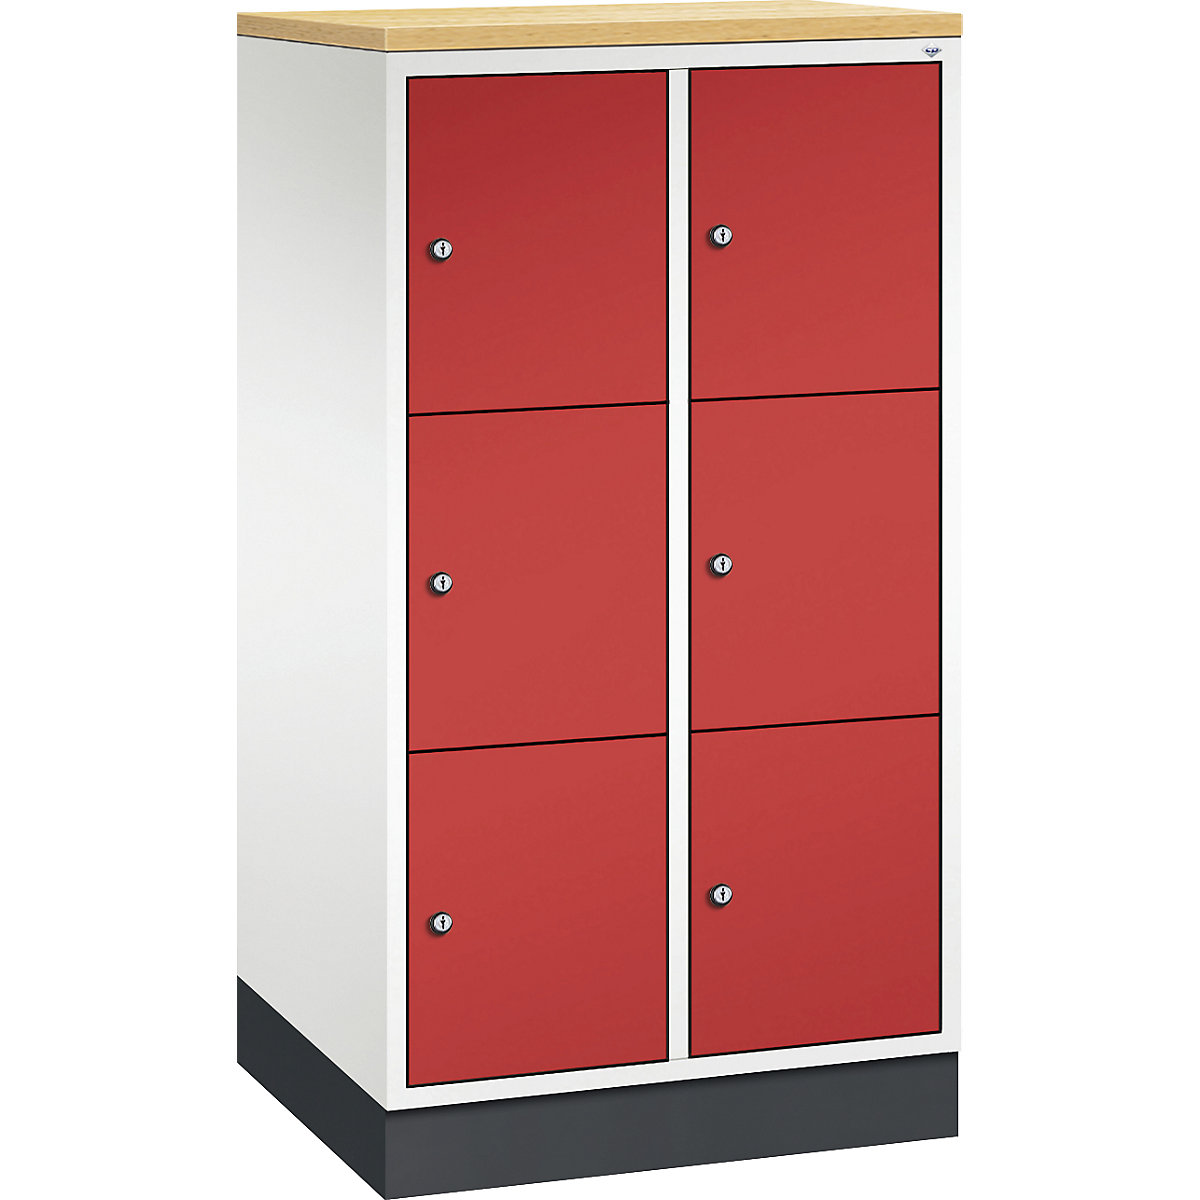 INTRO steel compartment locker, compartment height 345 mm – C+P, WxD 620 x 500 mm, 6 compartments, pure white body, flame red doors